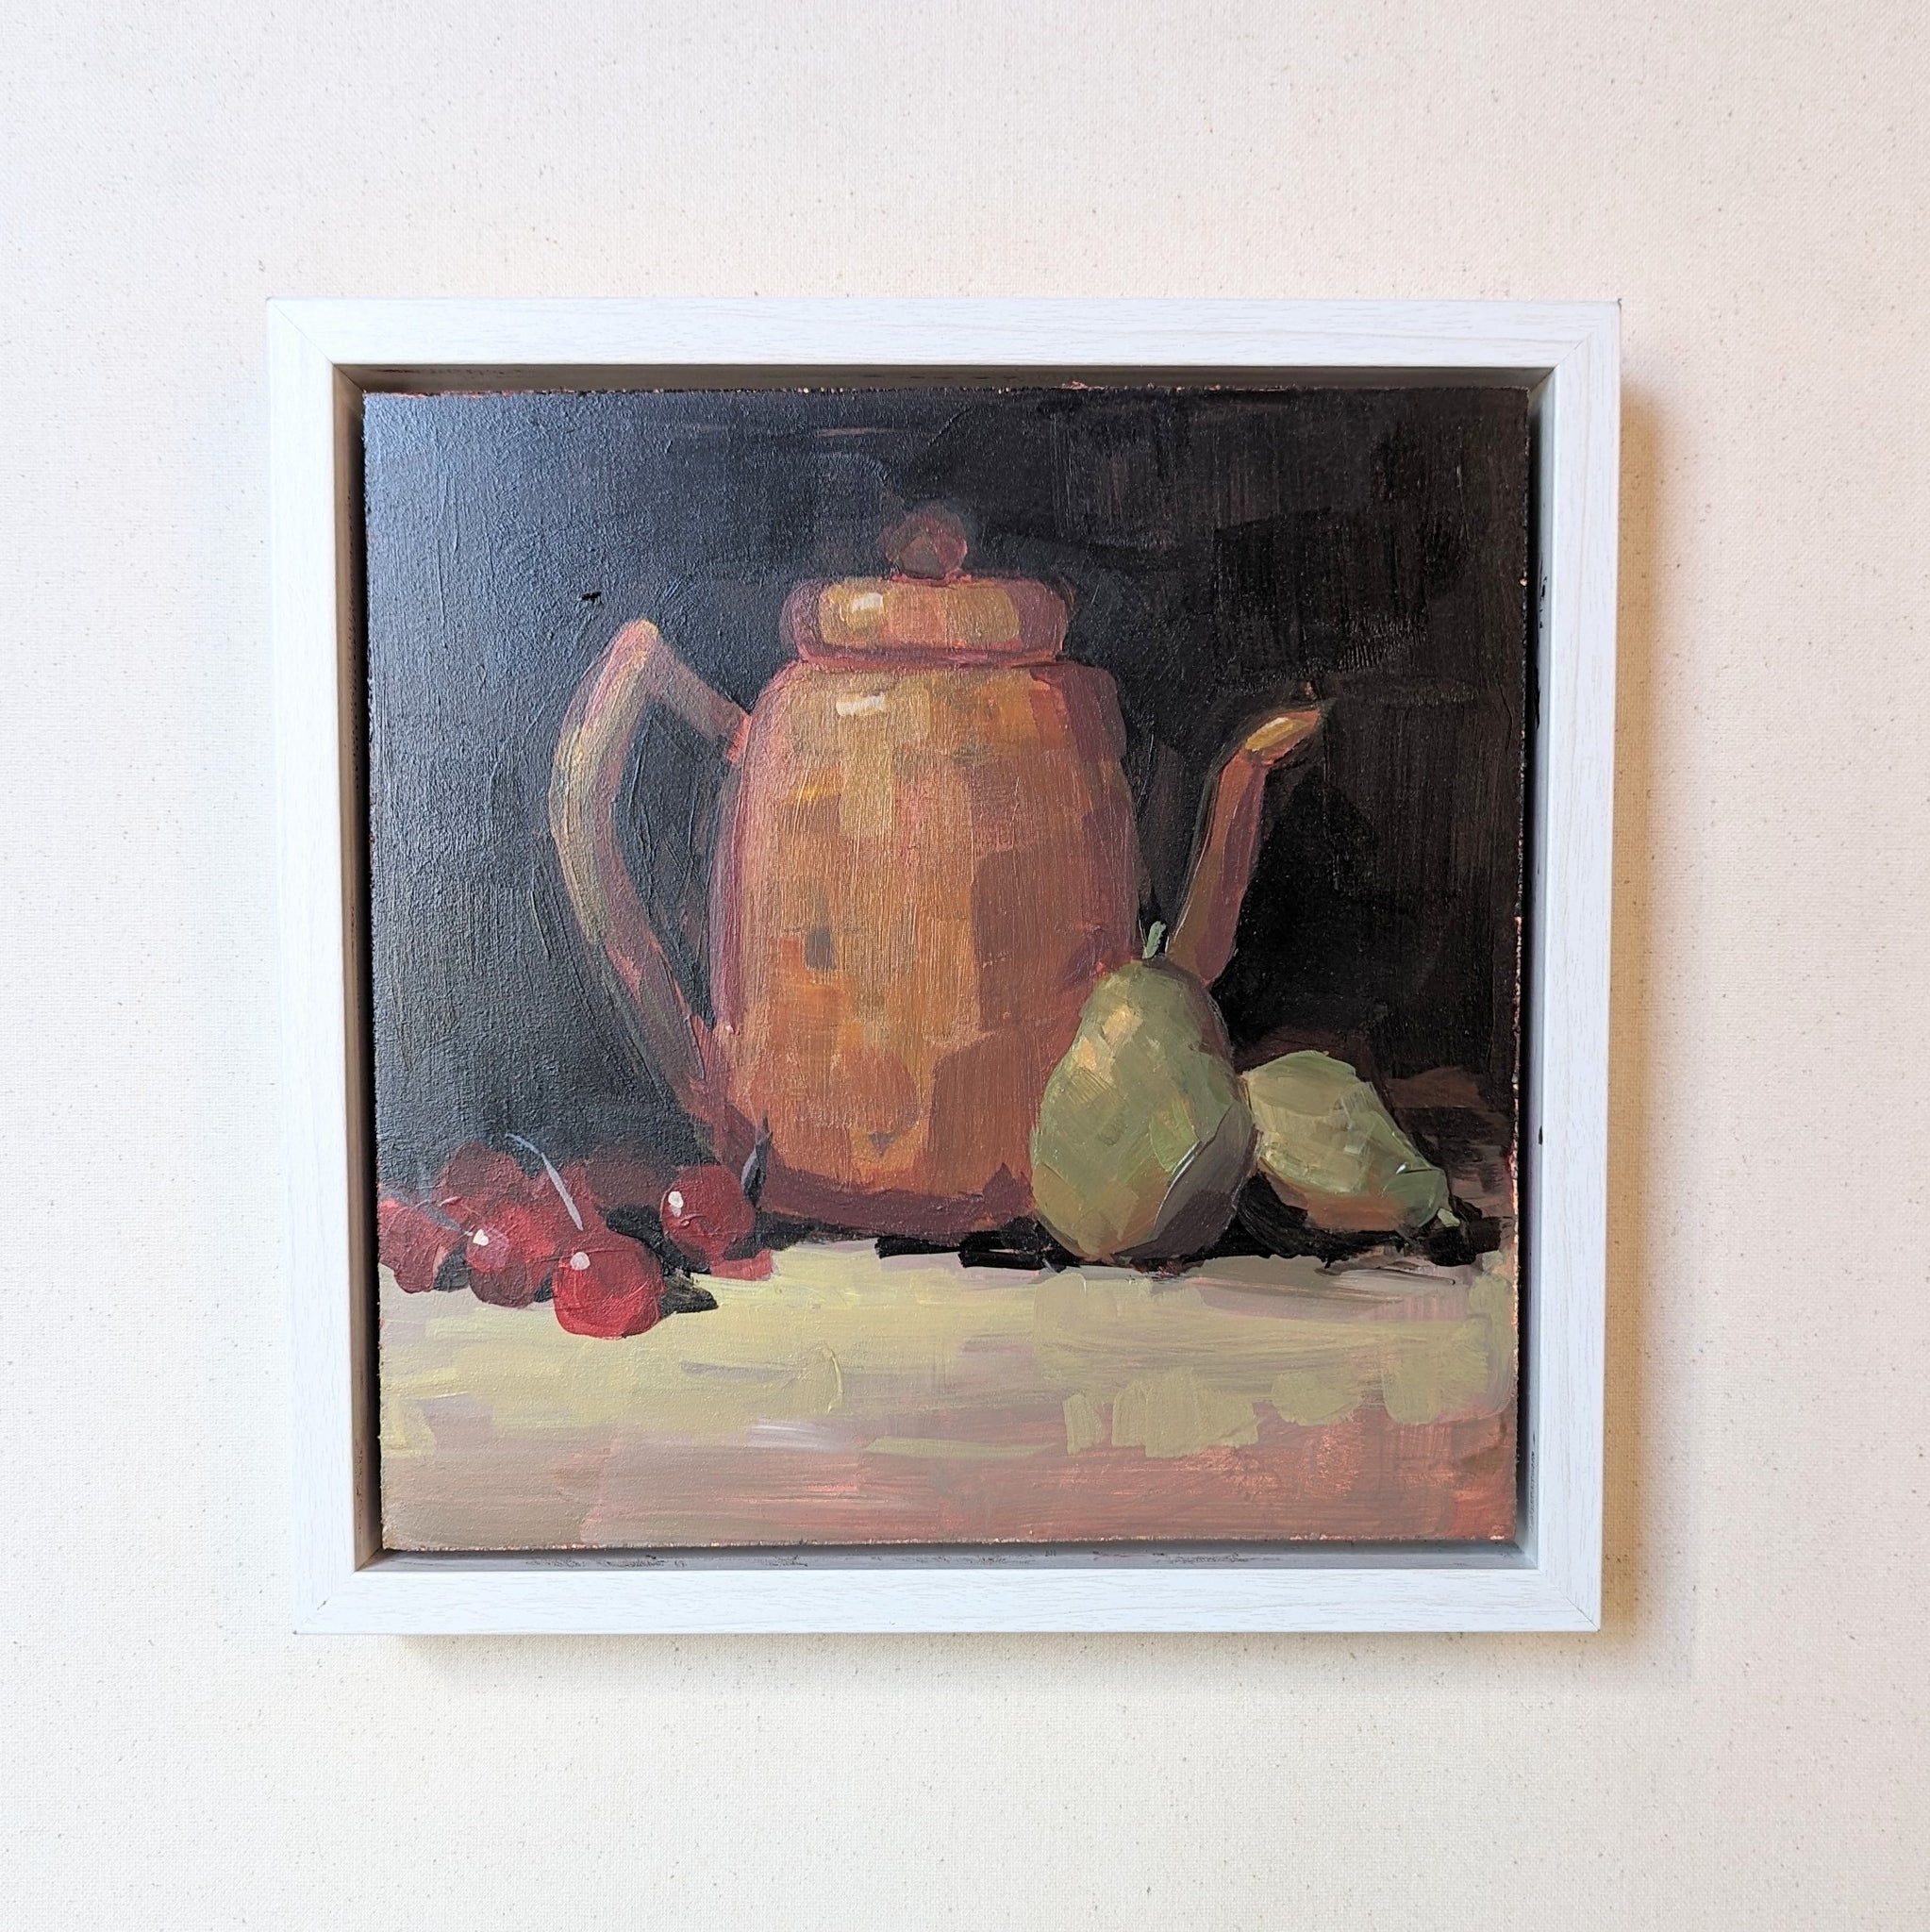 No. 11 "Still Life With Cherries and Pears"